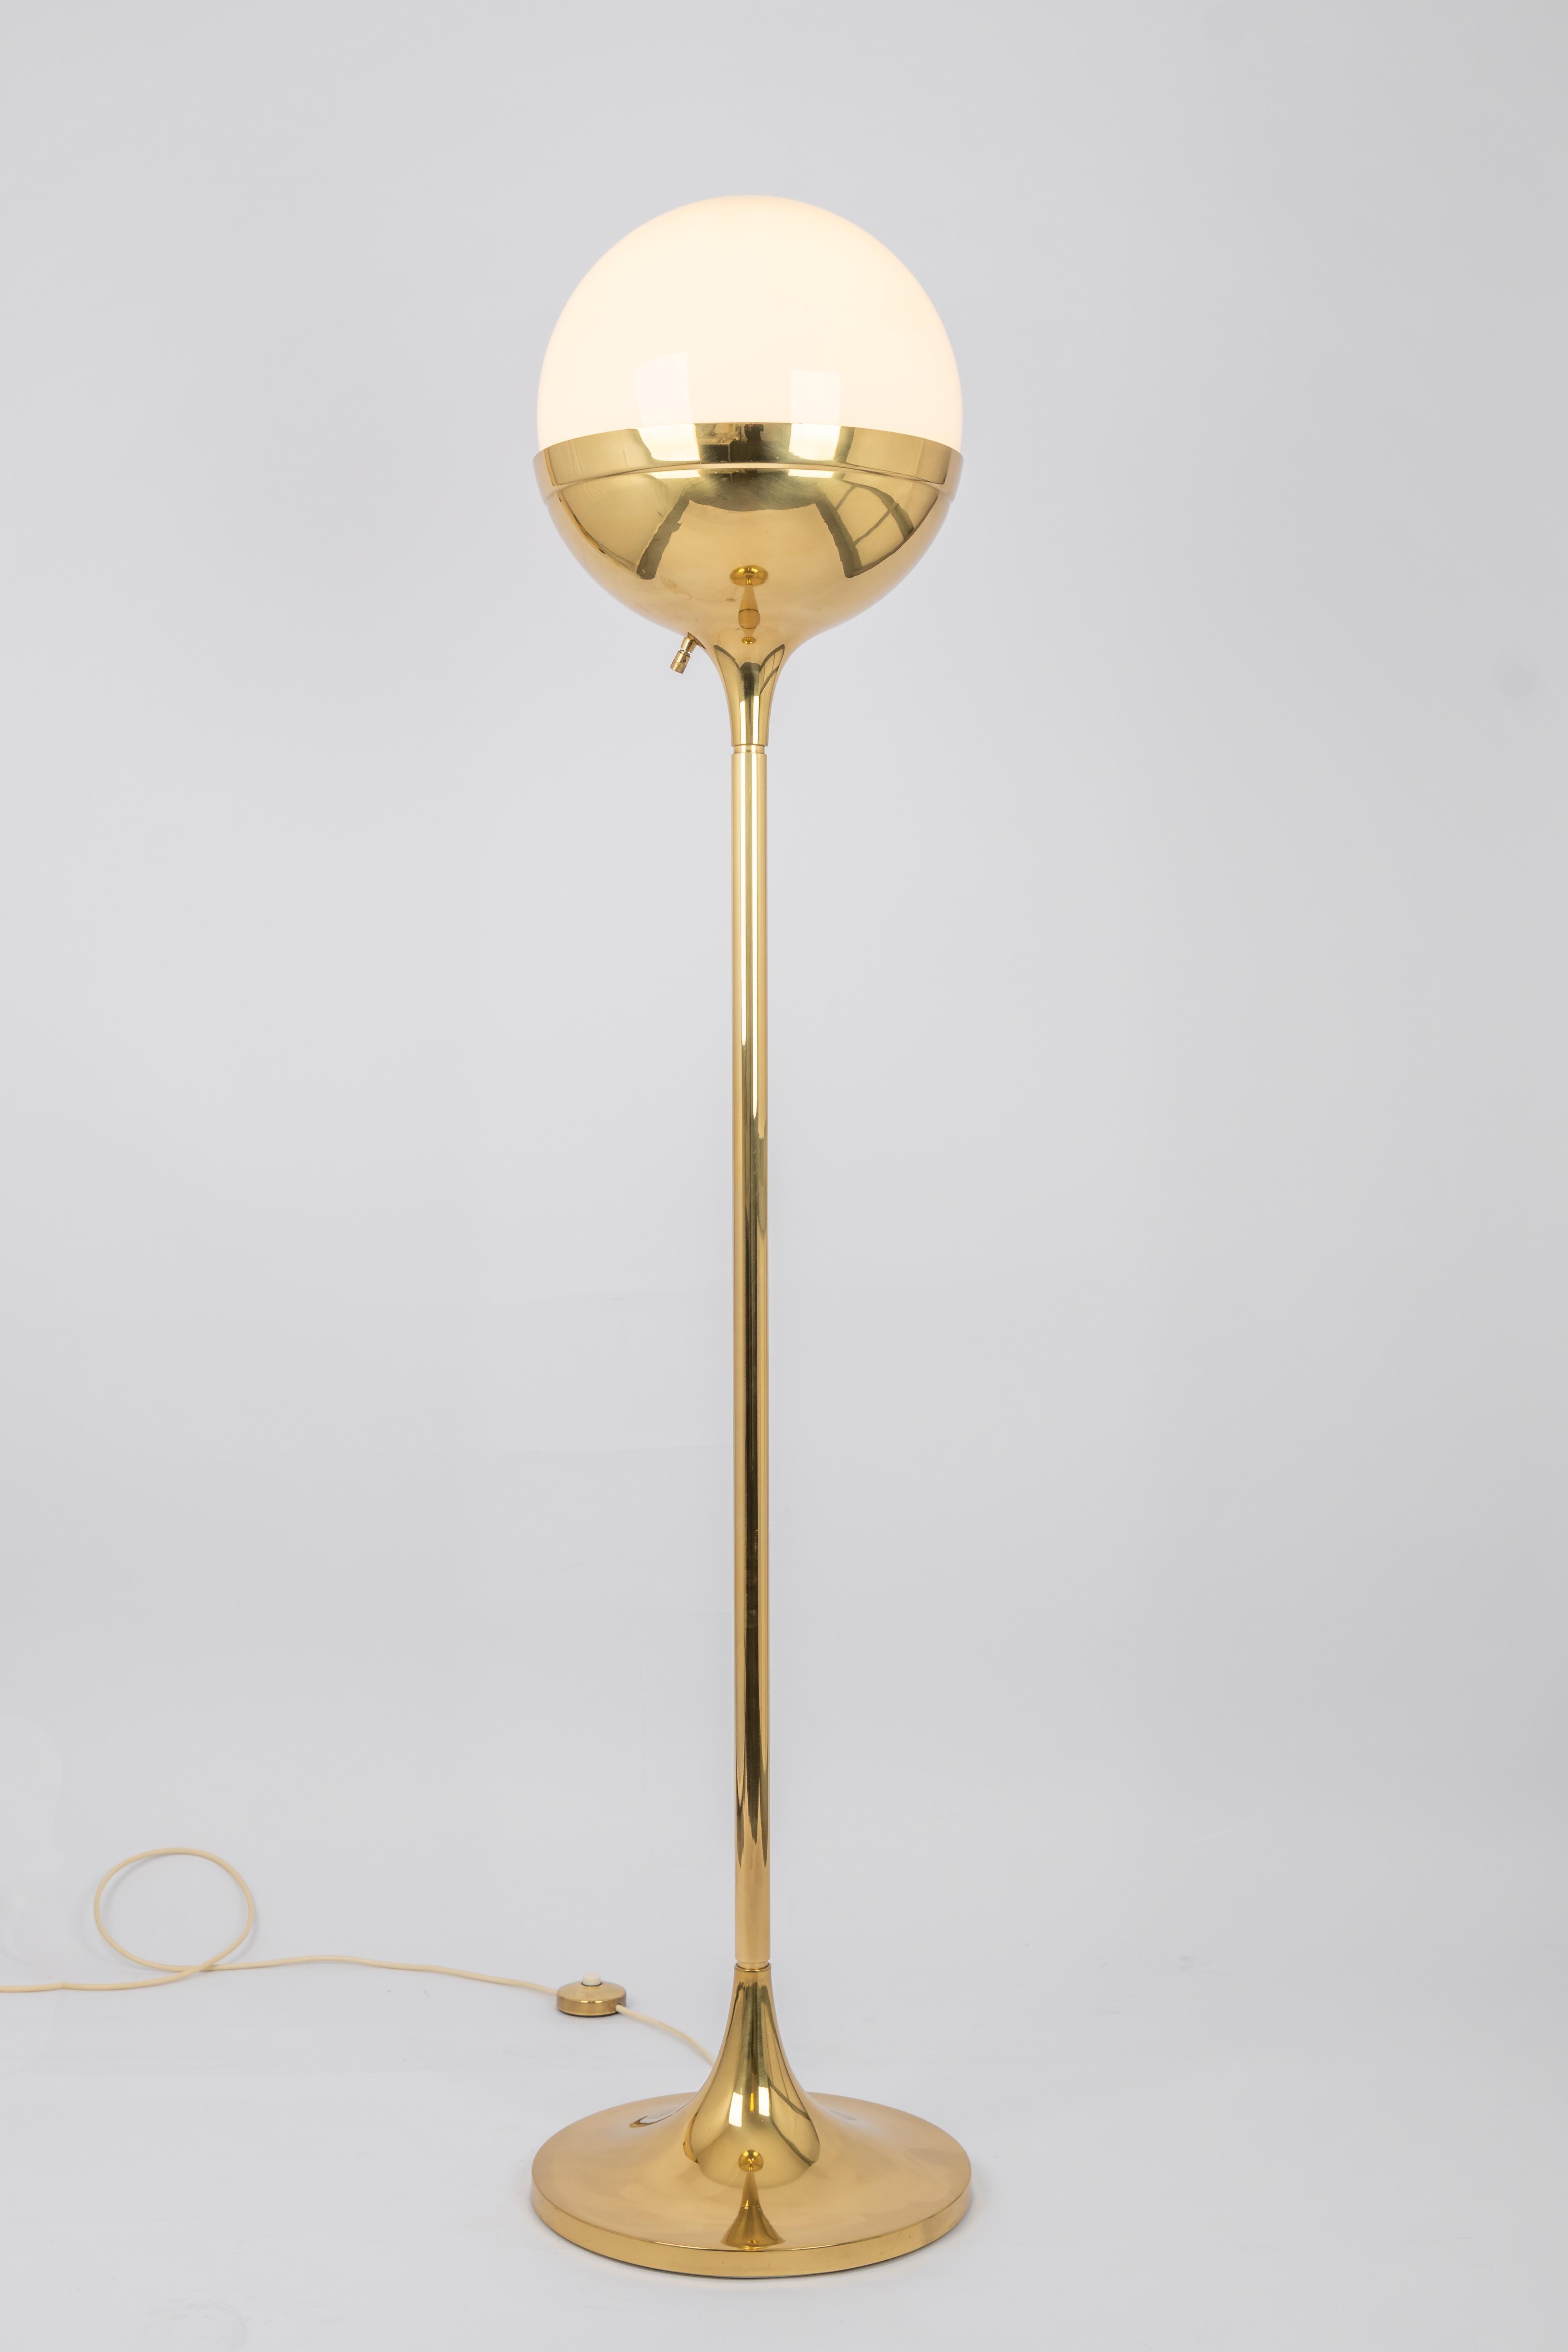 1 of 2 Mid-Century brass globe floor lamp by U.W for Art & Craft, Germany, 1960s For Sale 3